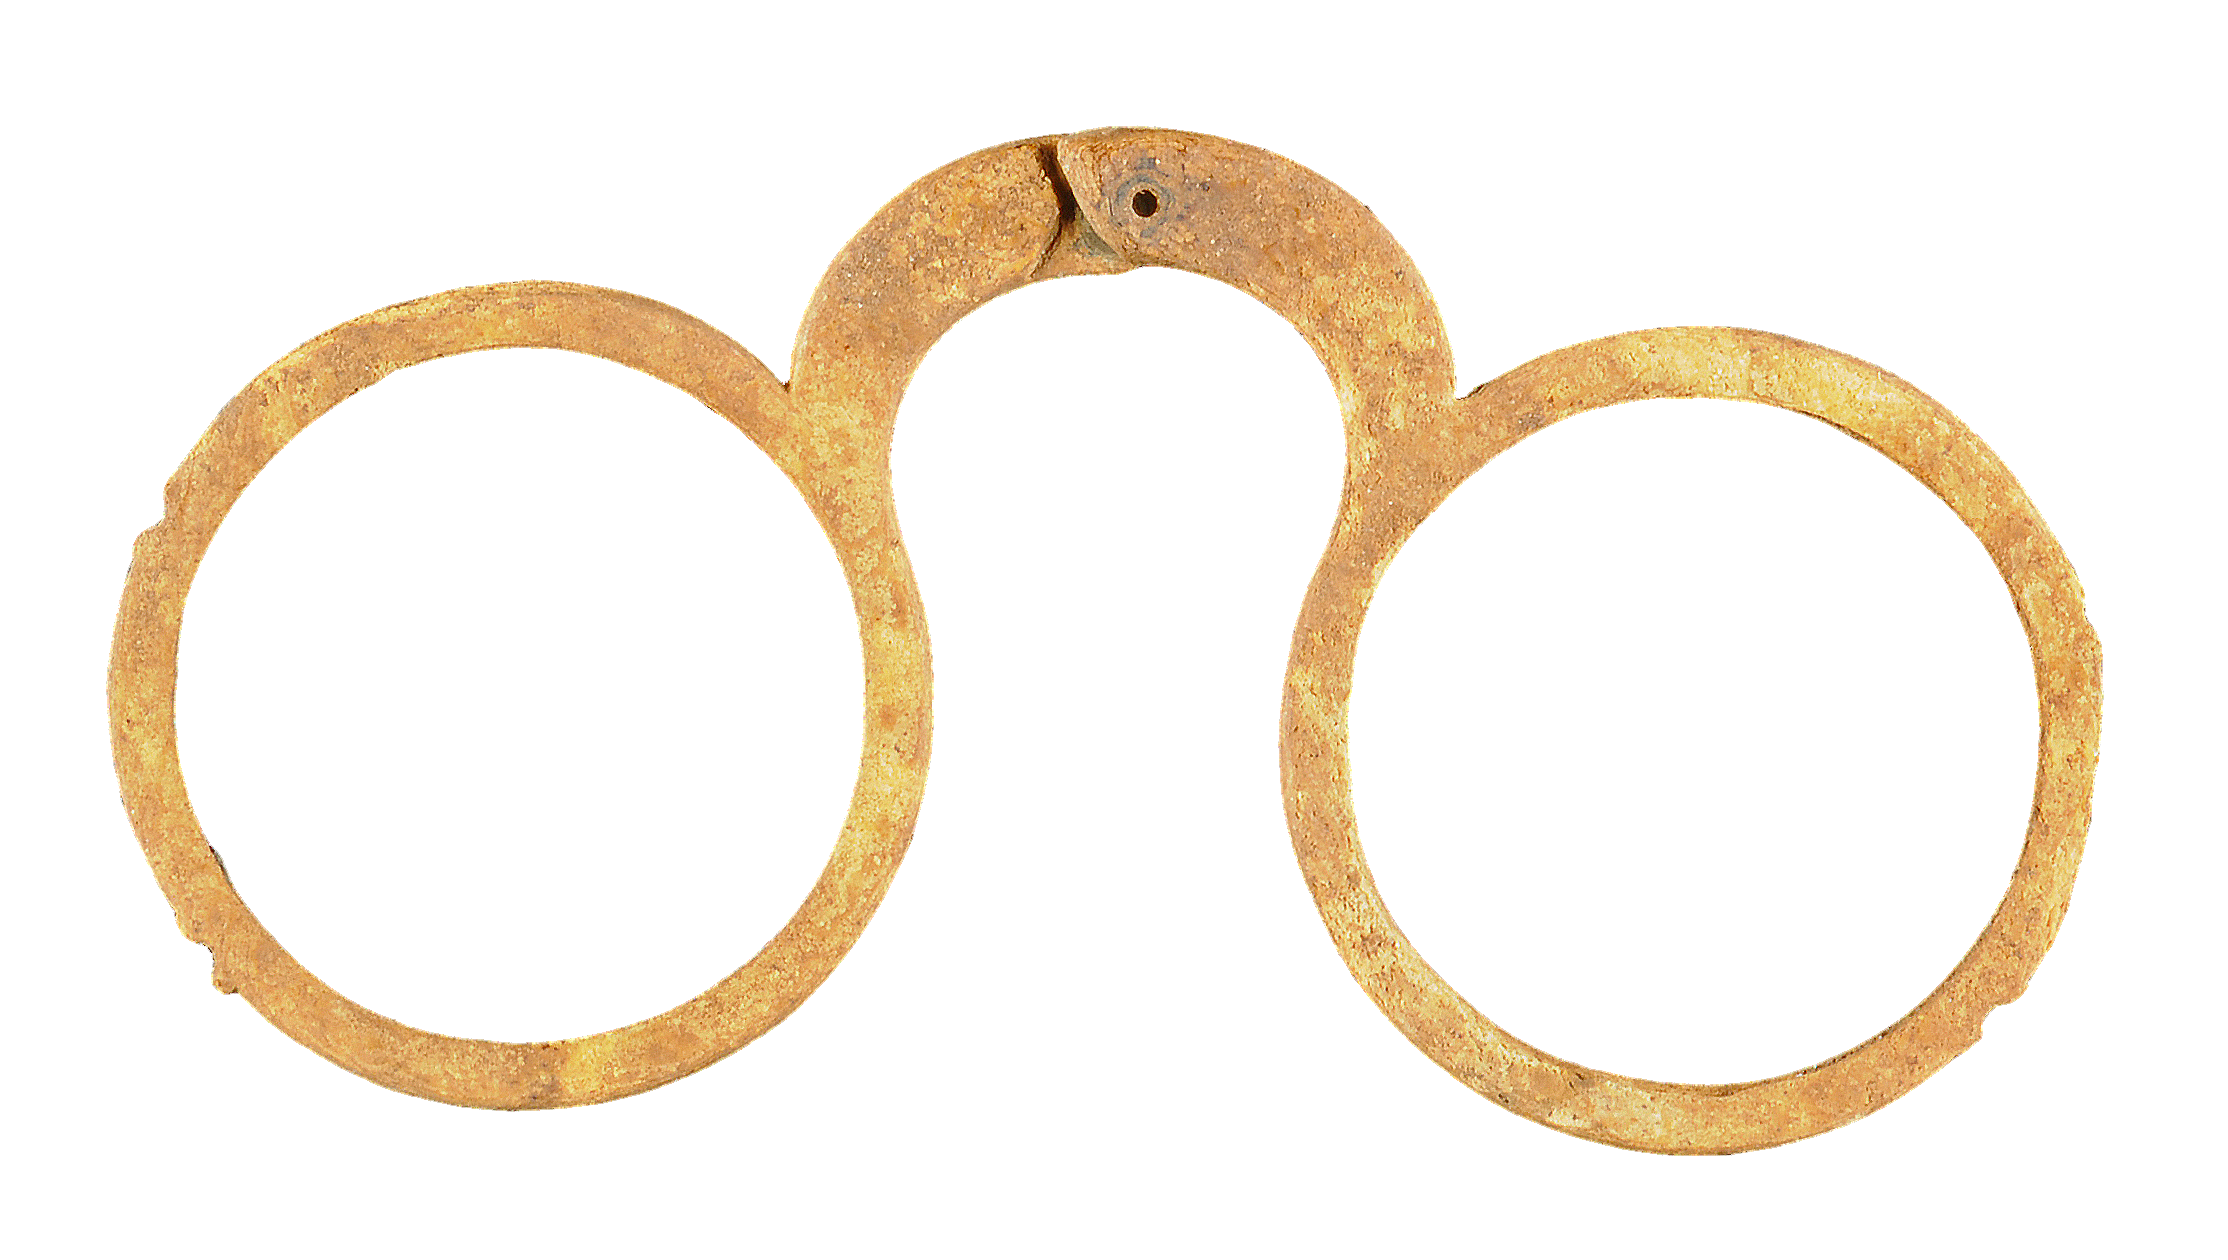 These could be the oldest spectacles found in the United States.